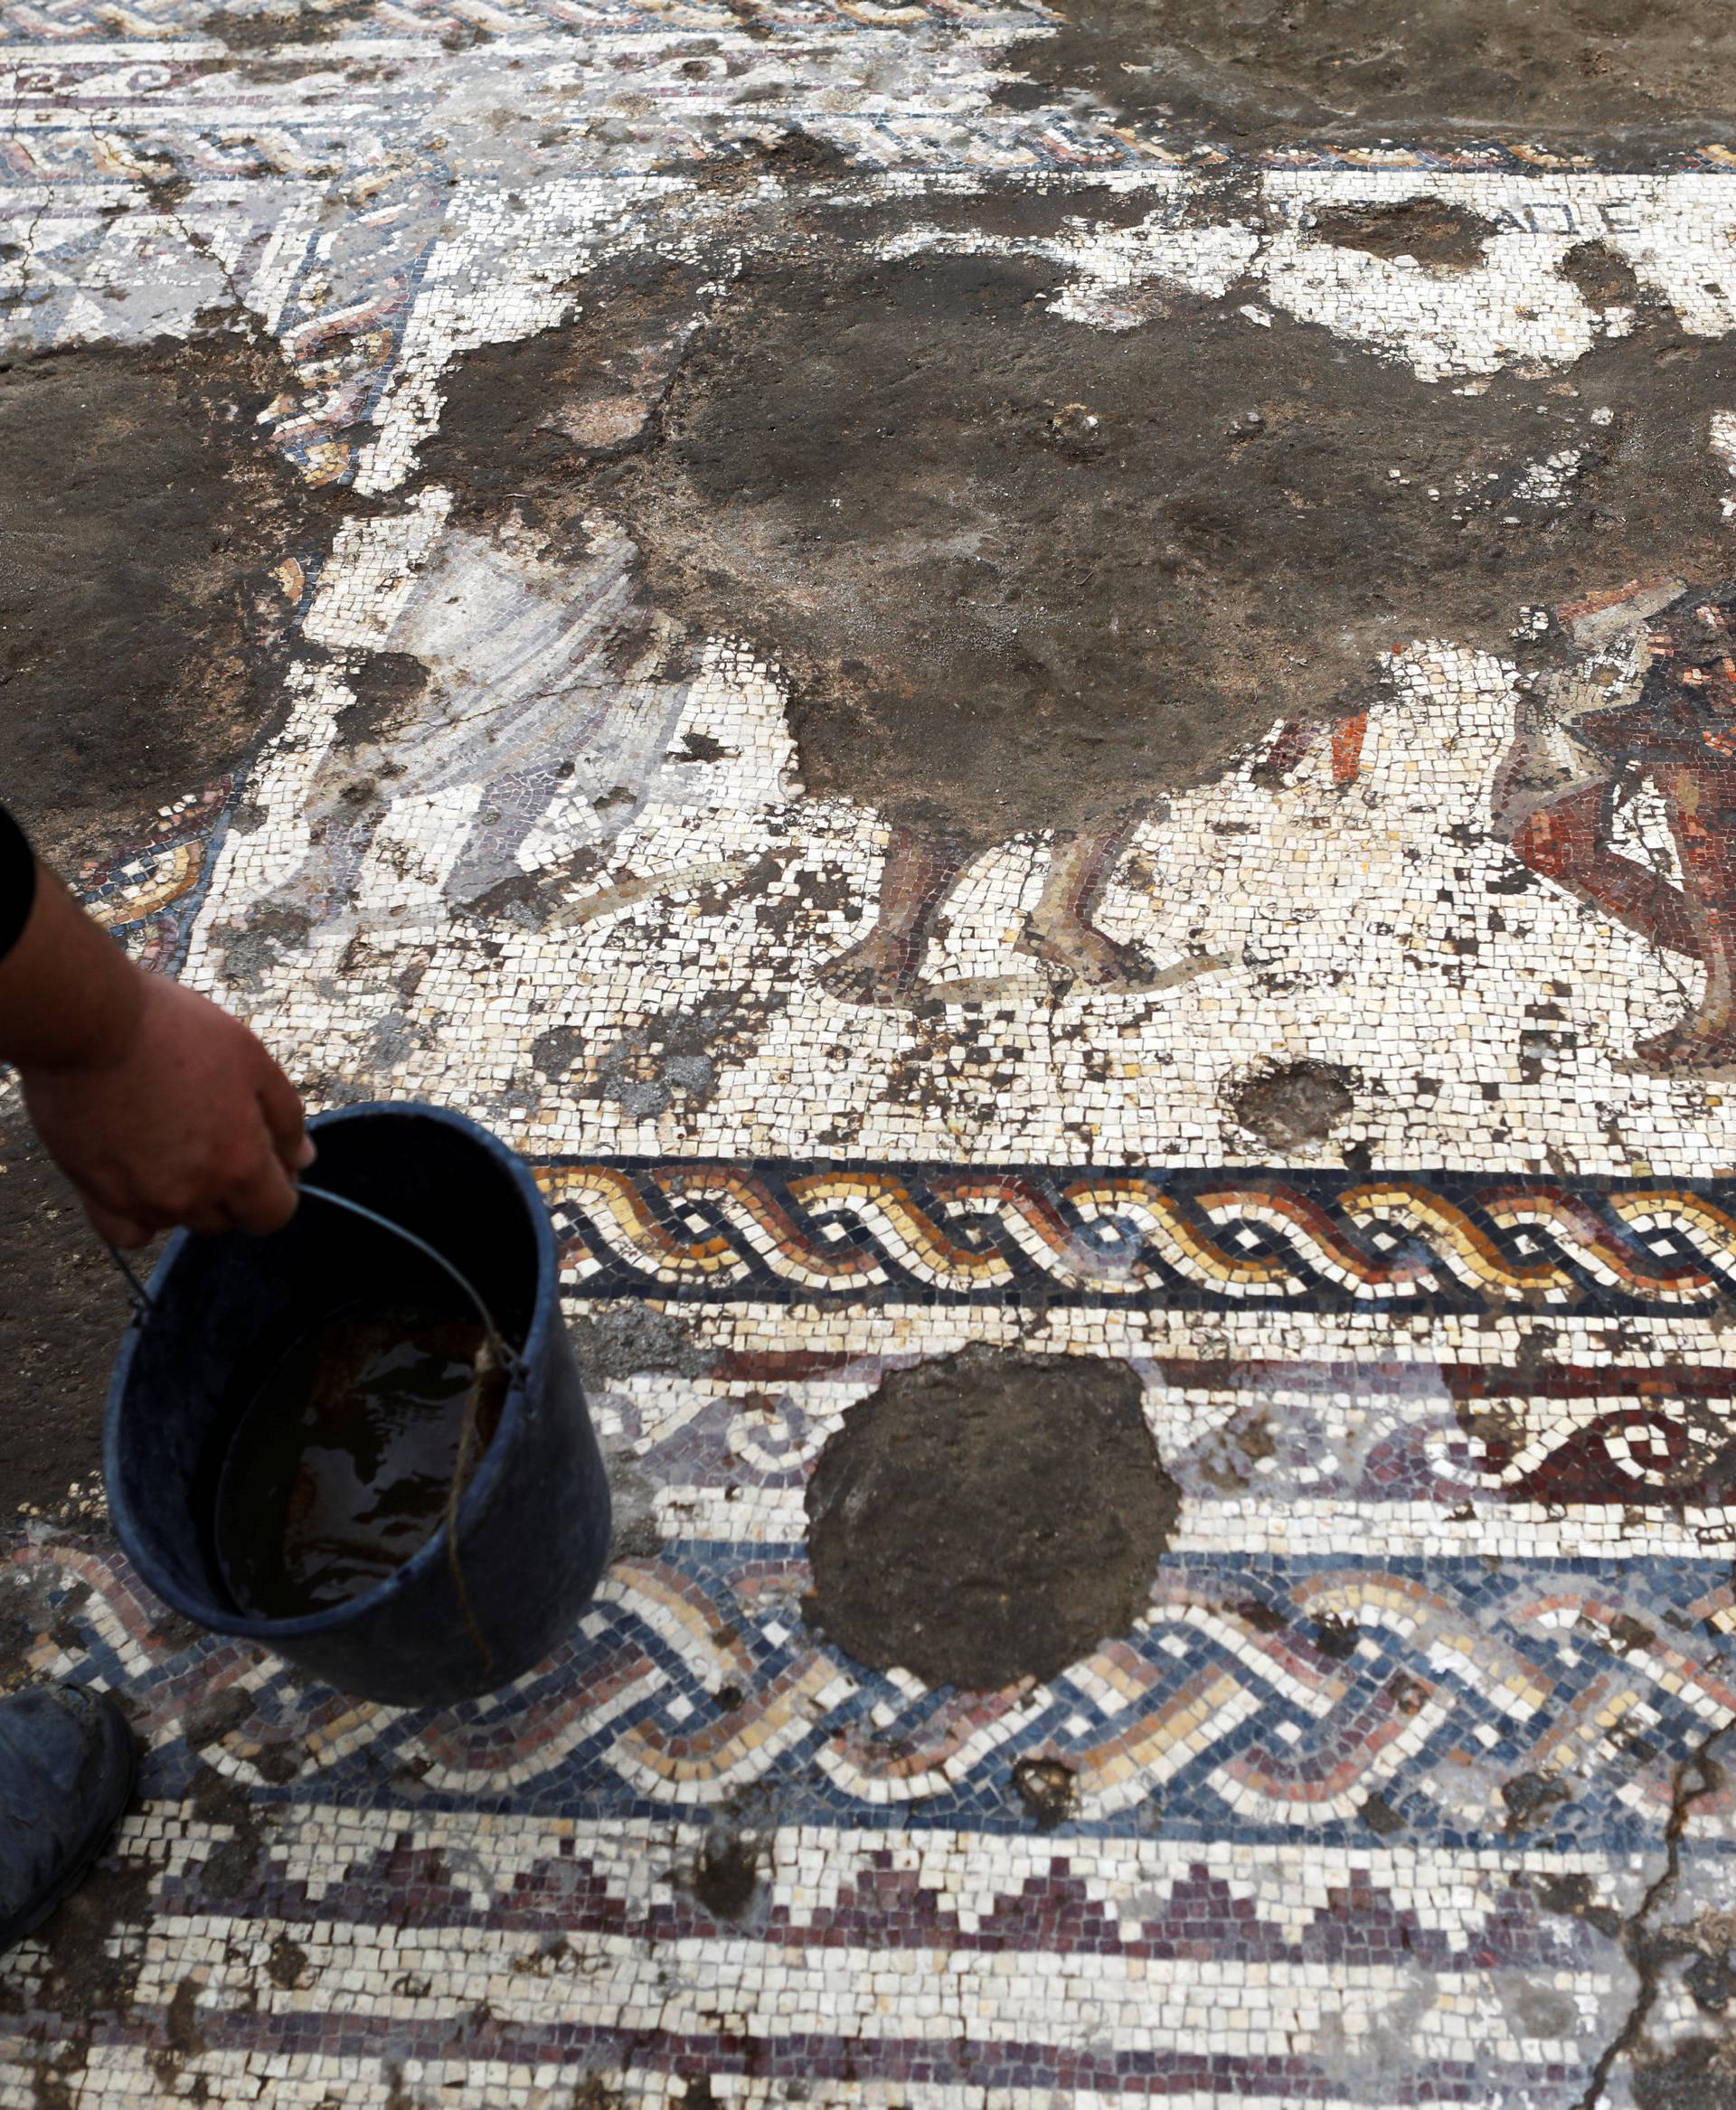 An Israel Antiquities Authority worker holds a bucket while cleaning a mosaic floor decorated with figures, which archaeologists say is 1,800 years old and was unearthed during an excavation in Caesarea